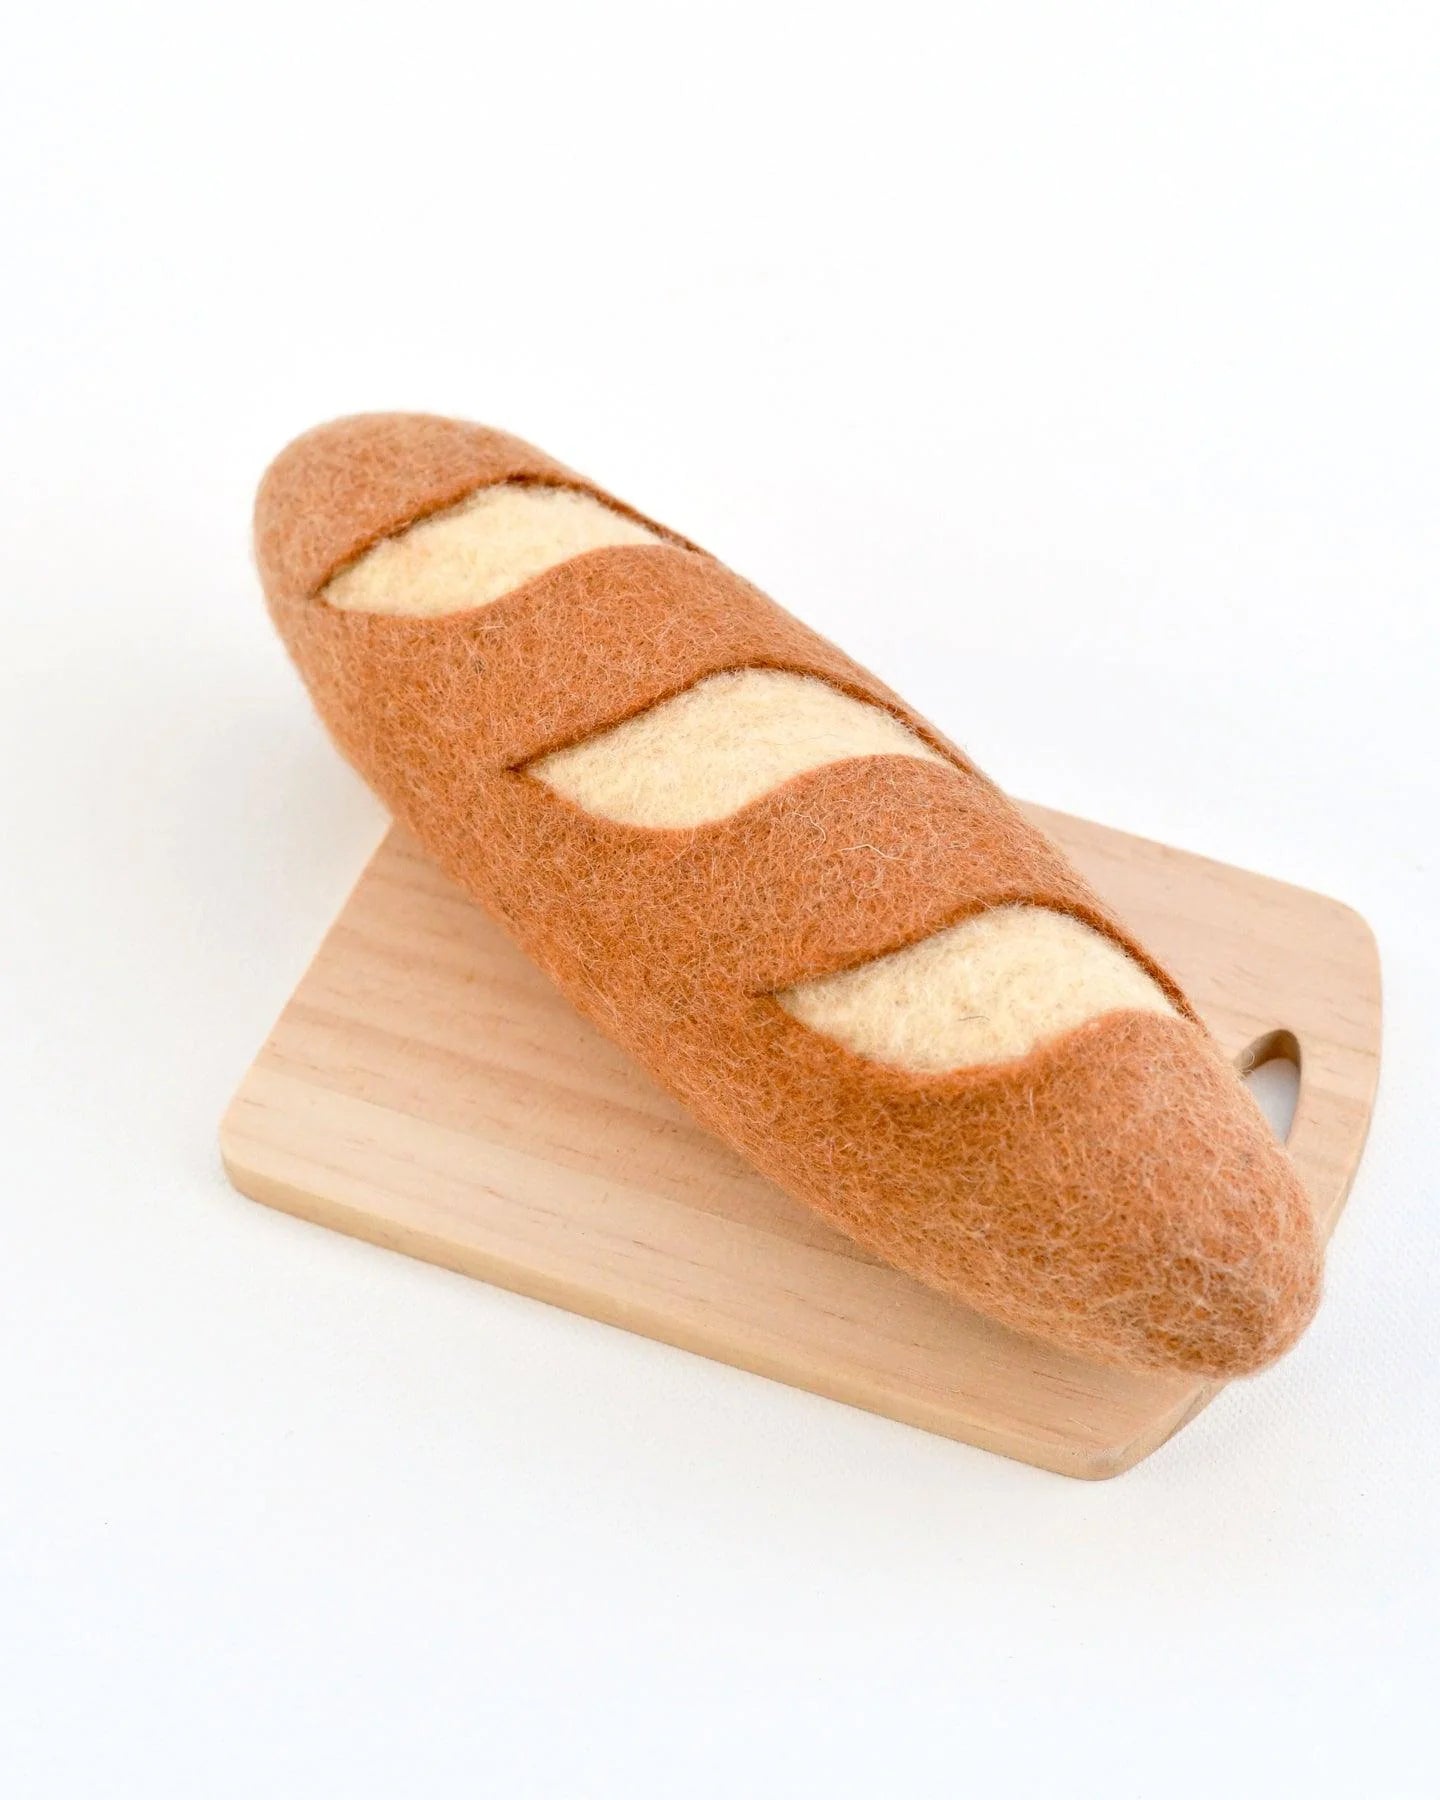 TARA TREASURES | FELT FRENCH LOAF OF BREAD *PRE-ORDER* by TARA TREASURES - The Playful Collective